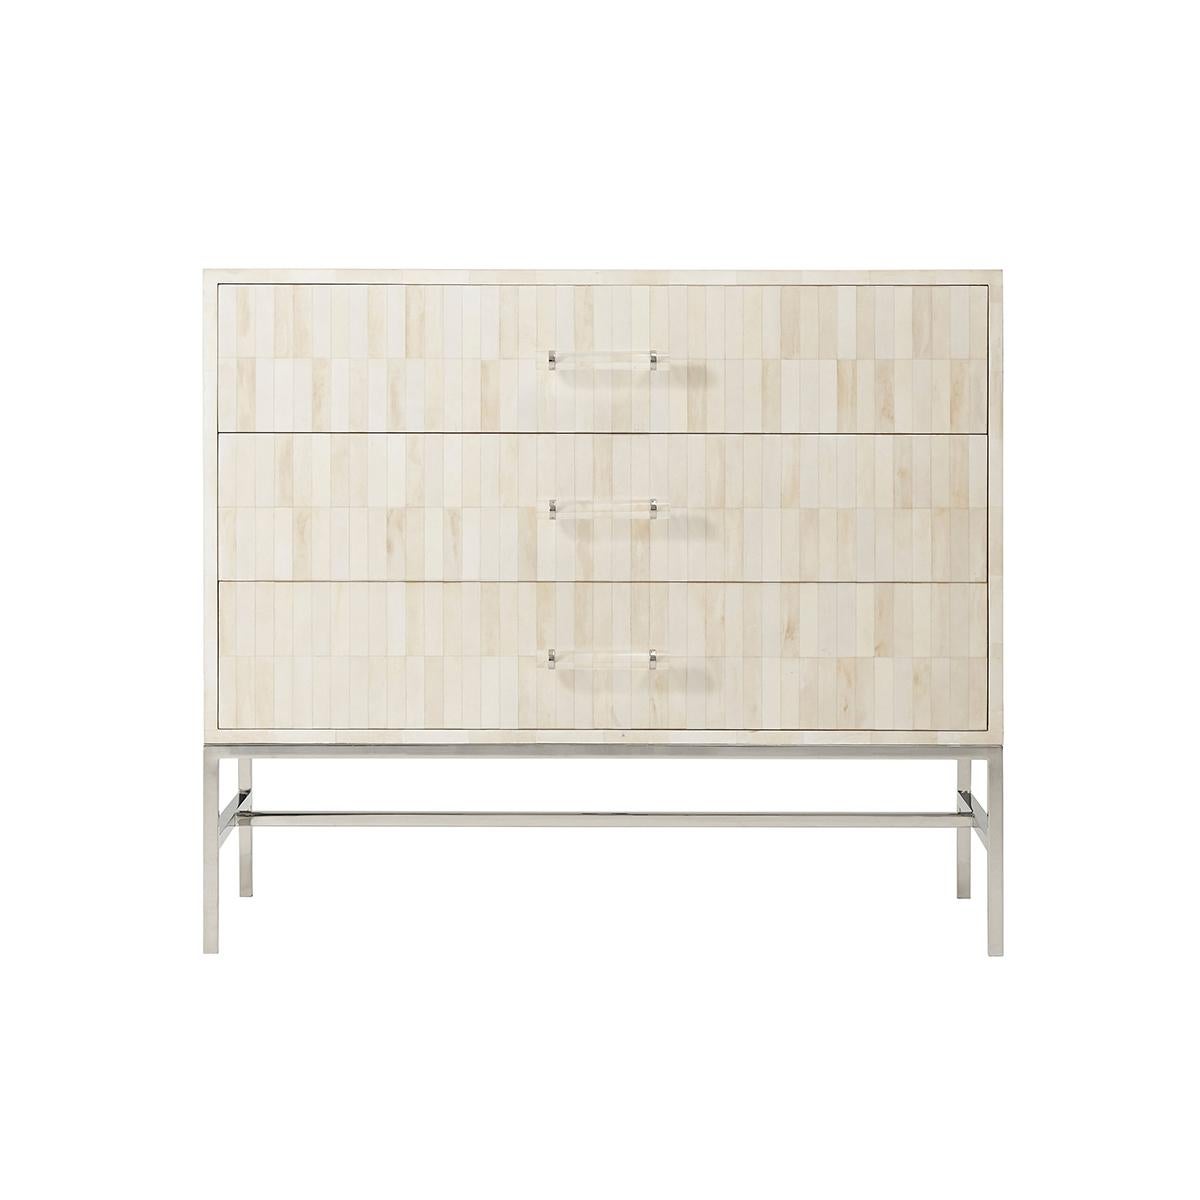 With hand-painted faux bone drawer fronts and upper case, the three soft closing drawers each with modern stainless steel and acrylic handles. Raised on a stainless steel H form stretcher base.
Dimensions: 42